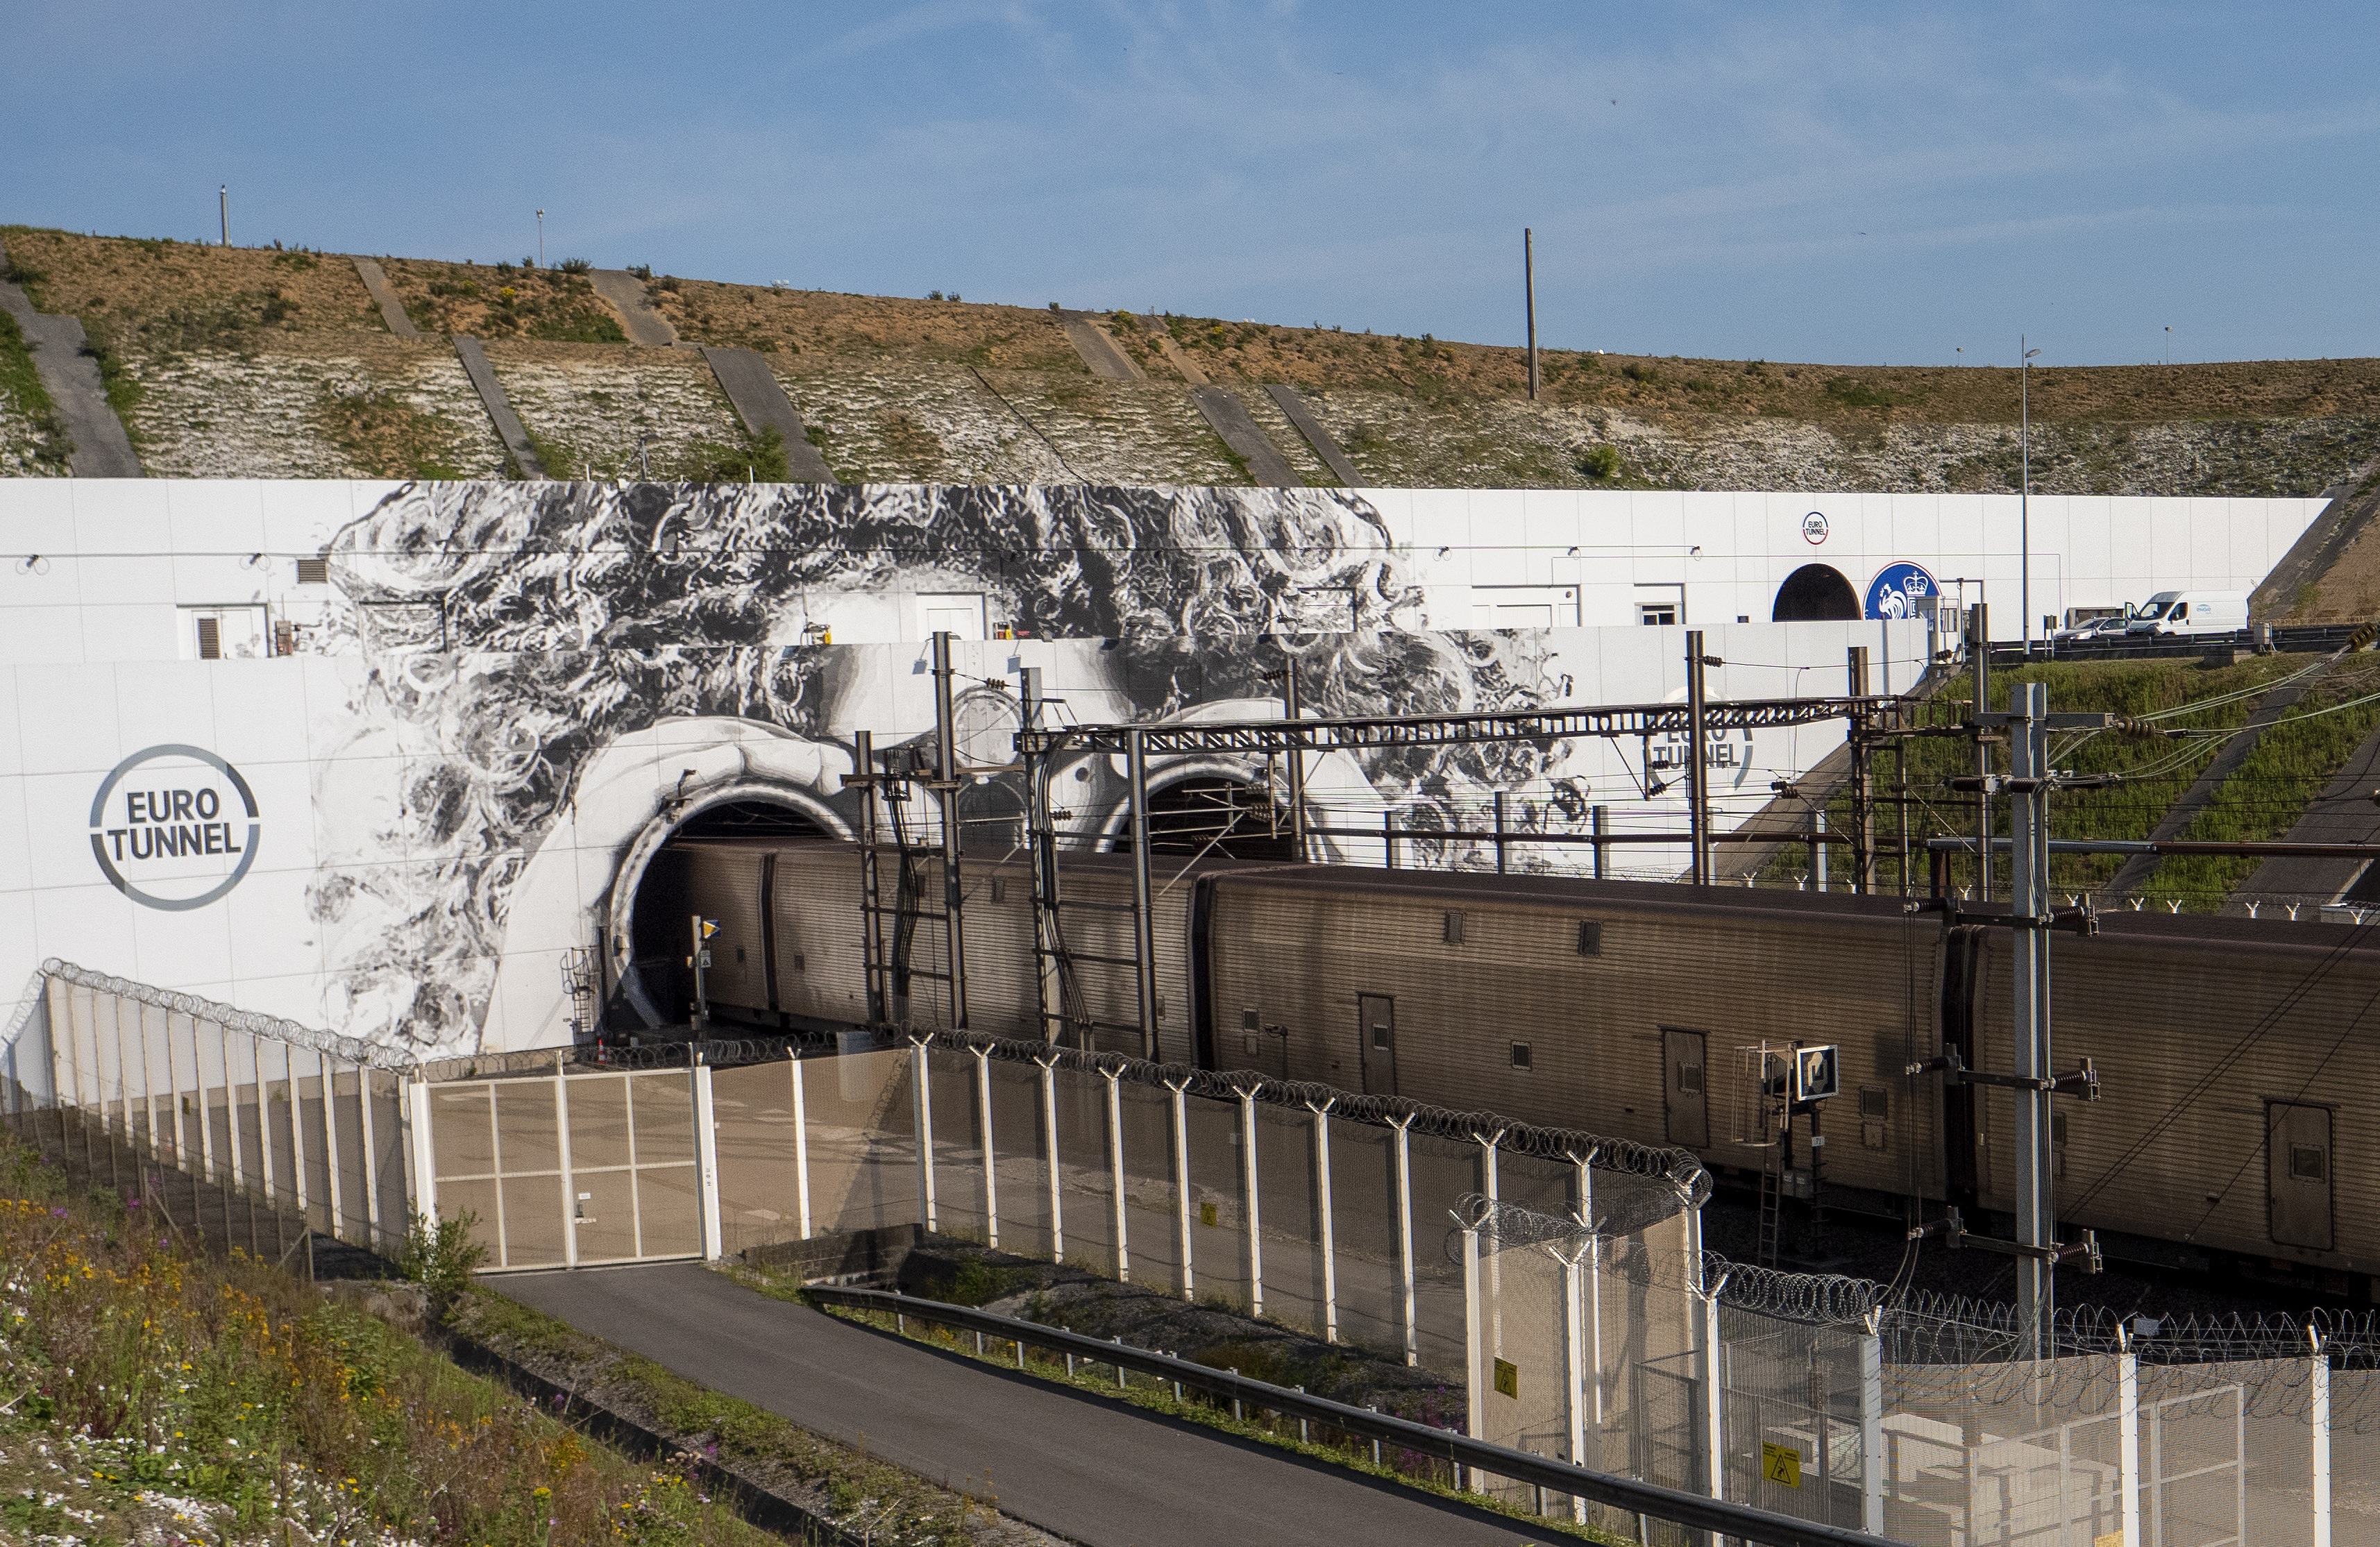 TÜV Rheinland certifies Eurotunnel according to hygiene and infection protection management standard